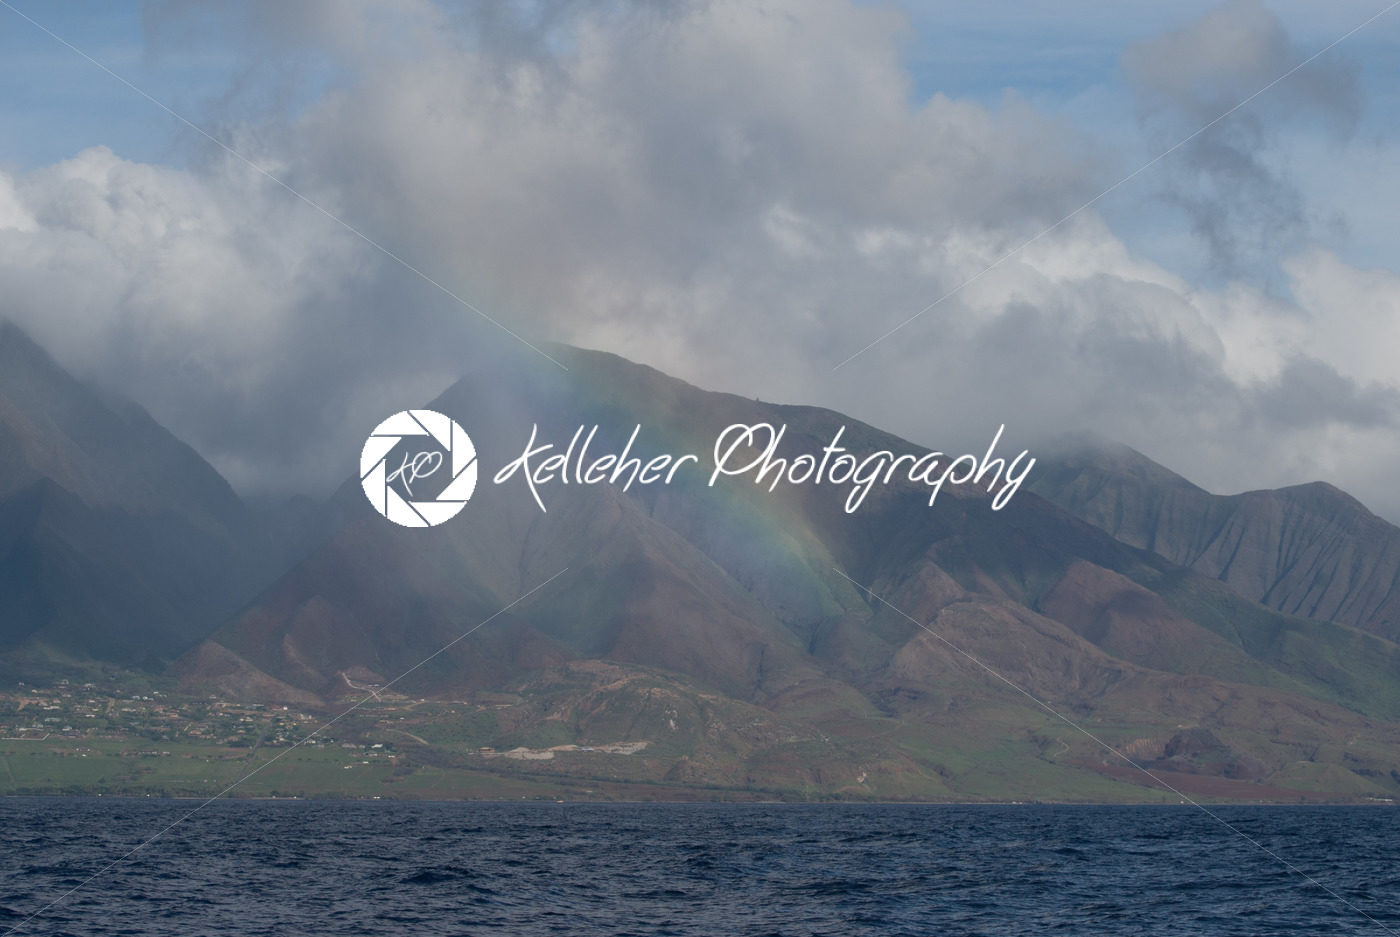 Tropical View, Lanai Lookout, Hawaii - Kelleher Photography Store